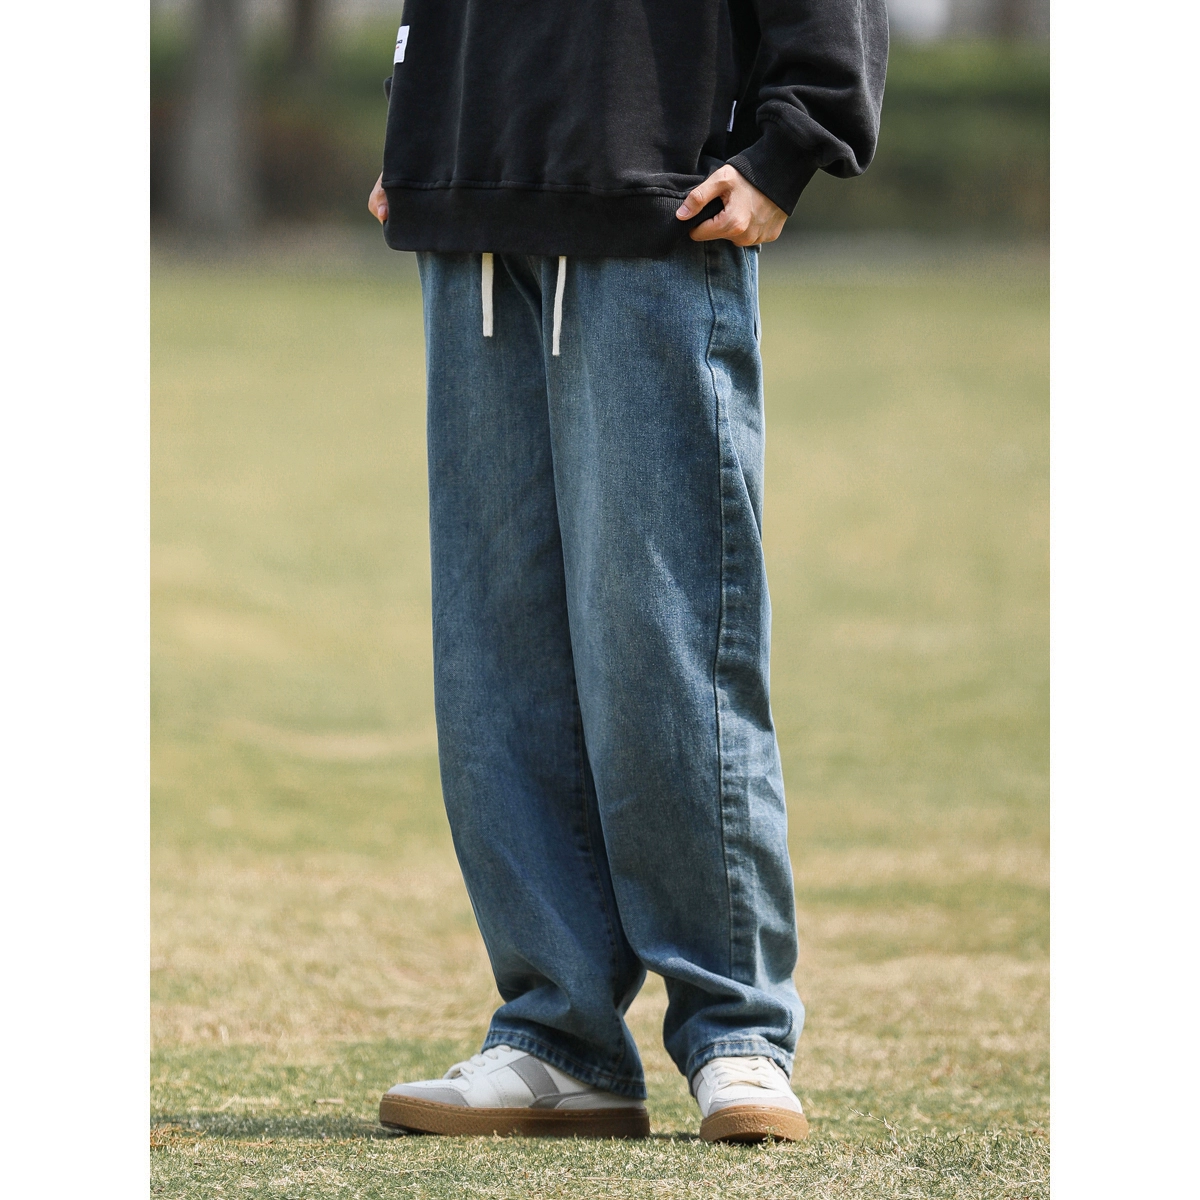 Woolen other men's trousers, chest strap cargo pants, breeches and shorts